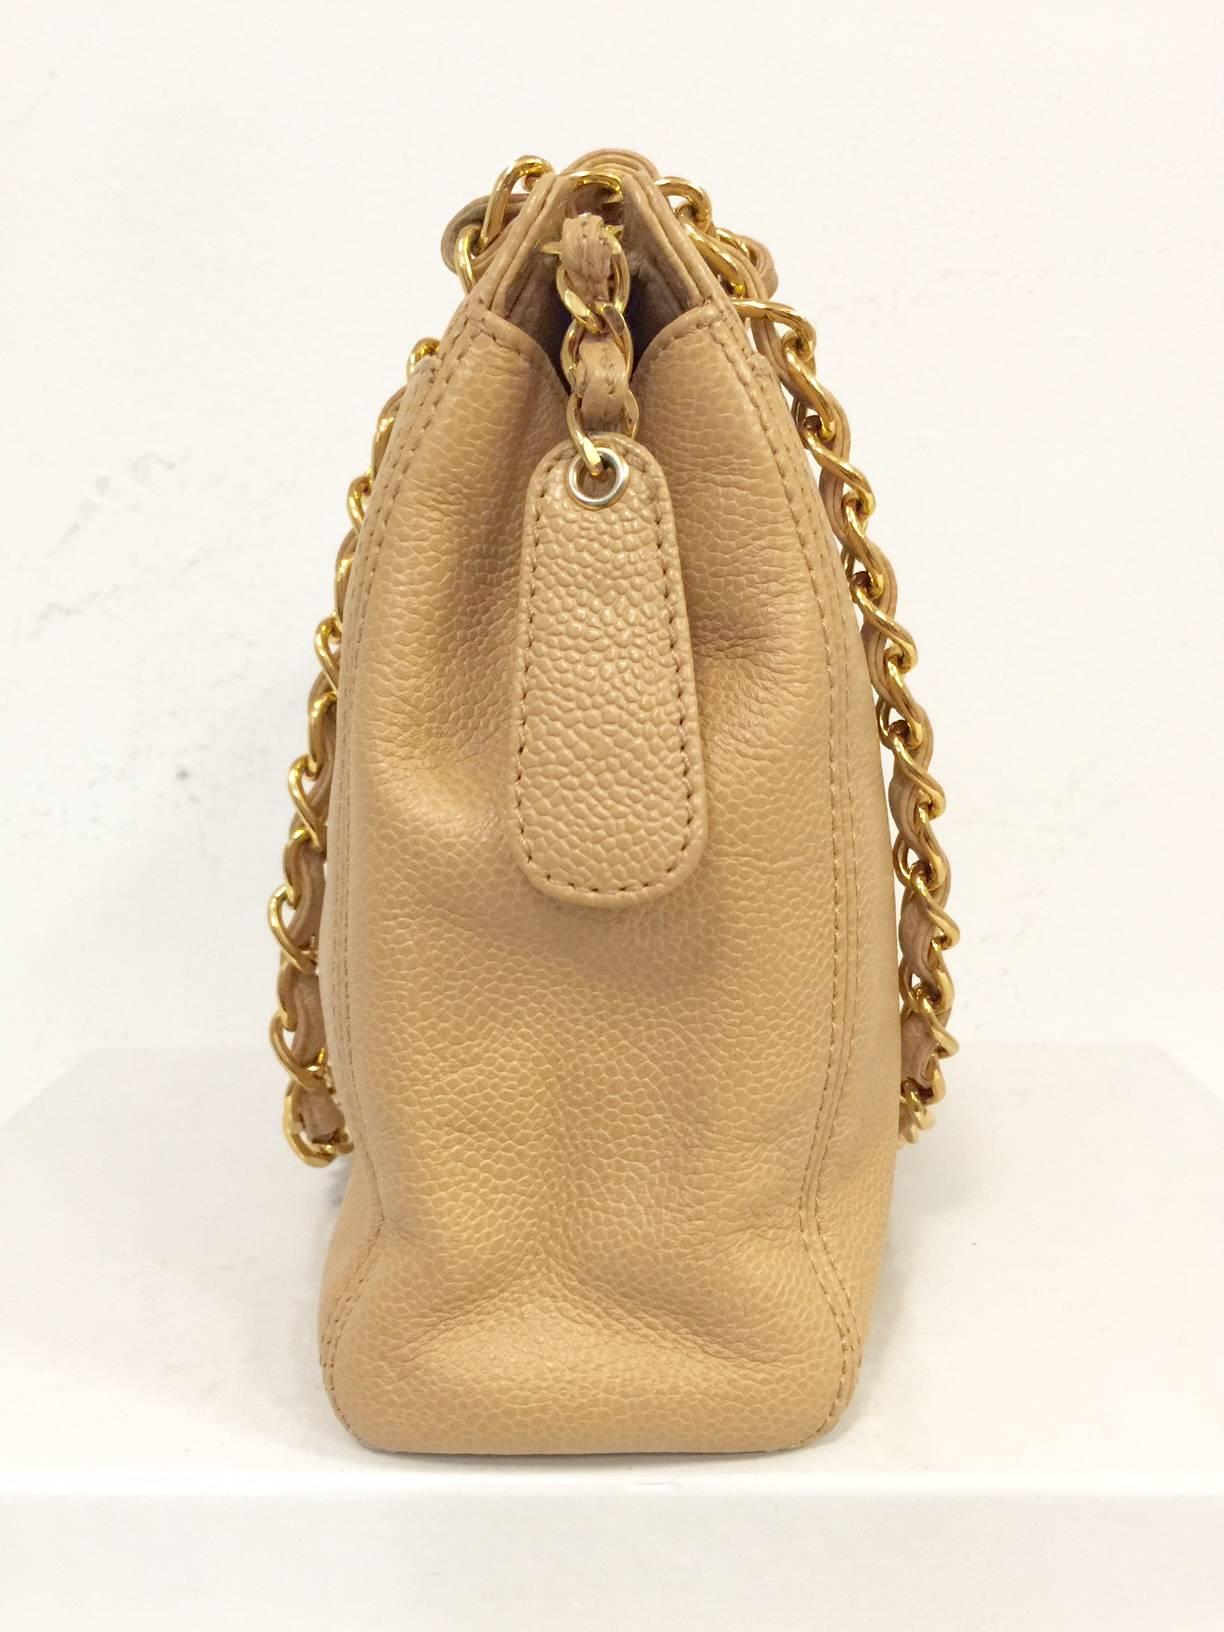 Women's Chanel Tan Caviar Leather Shoulder Bag/Double Leather Woven Chain Straps